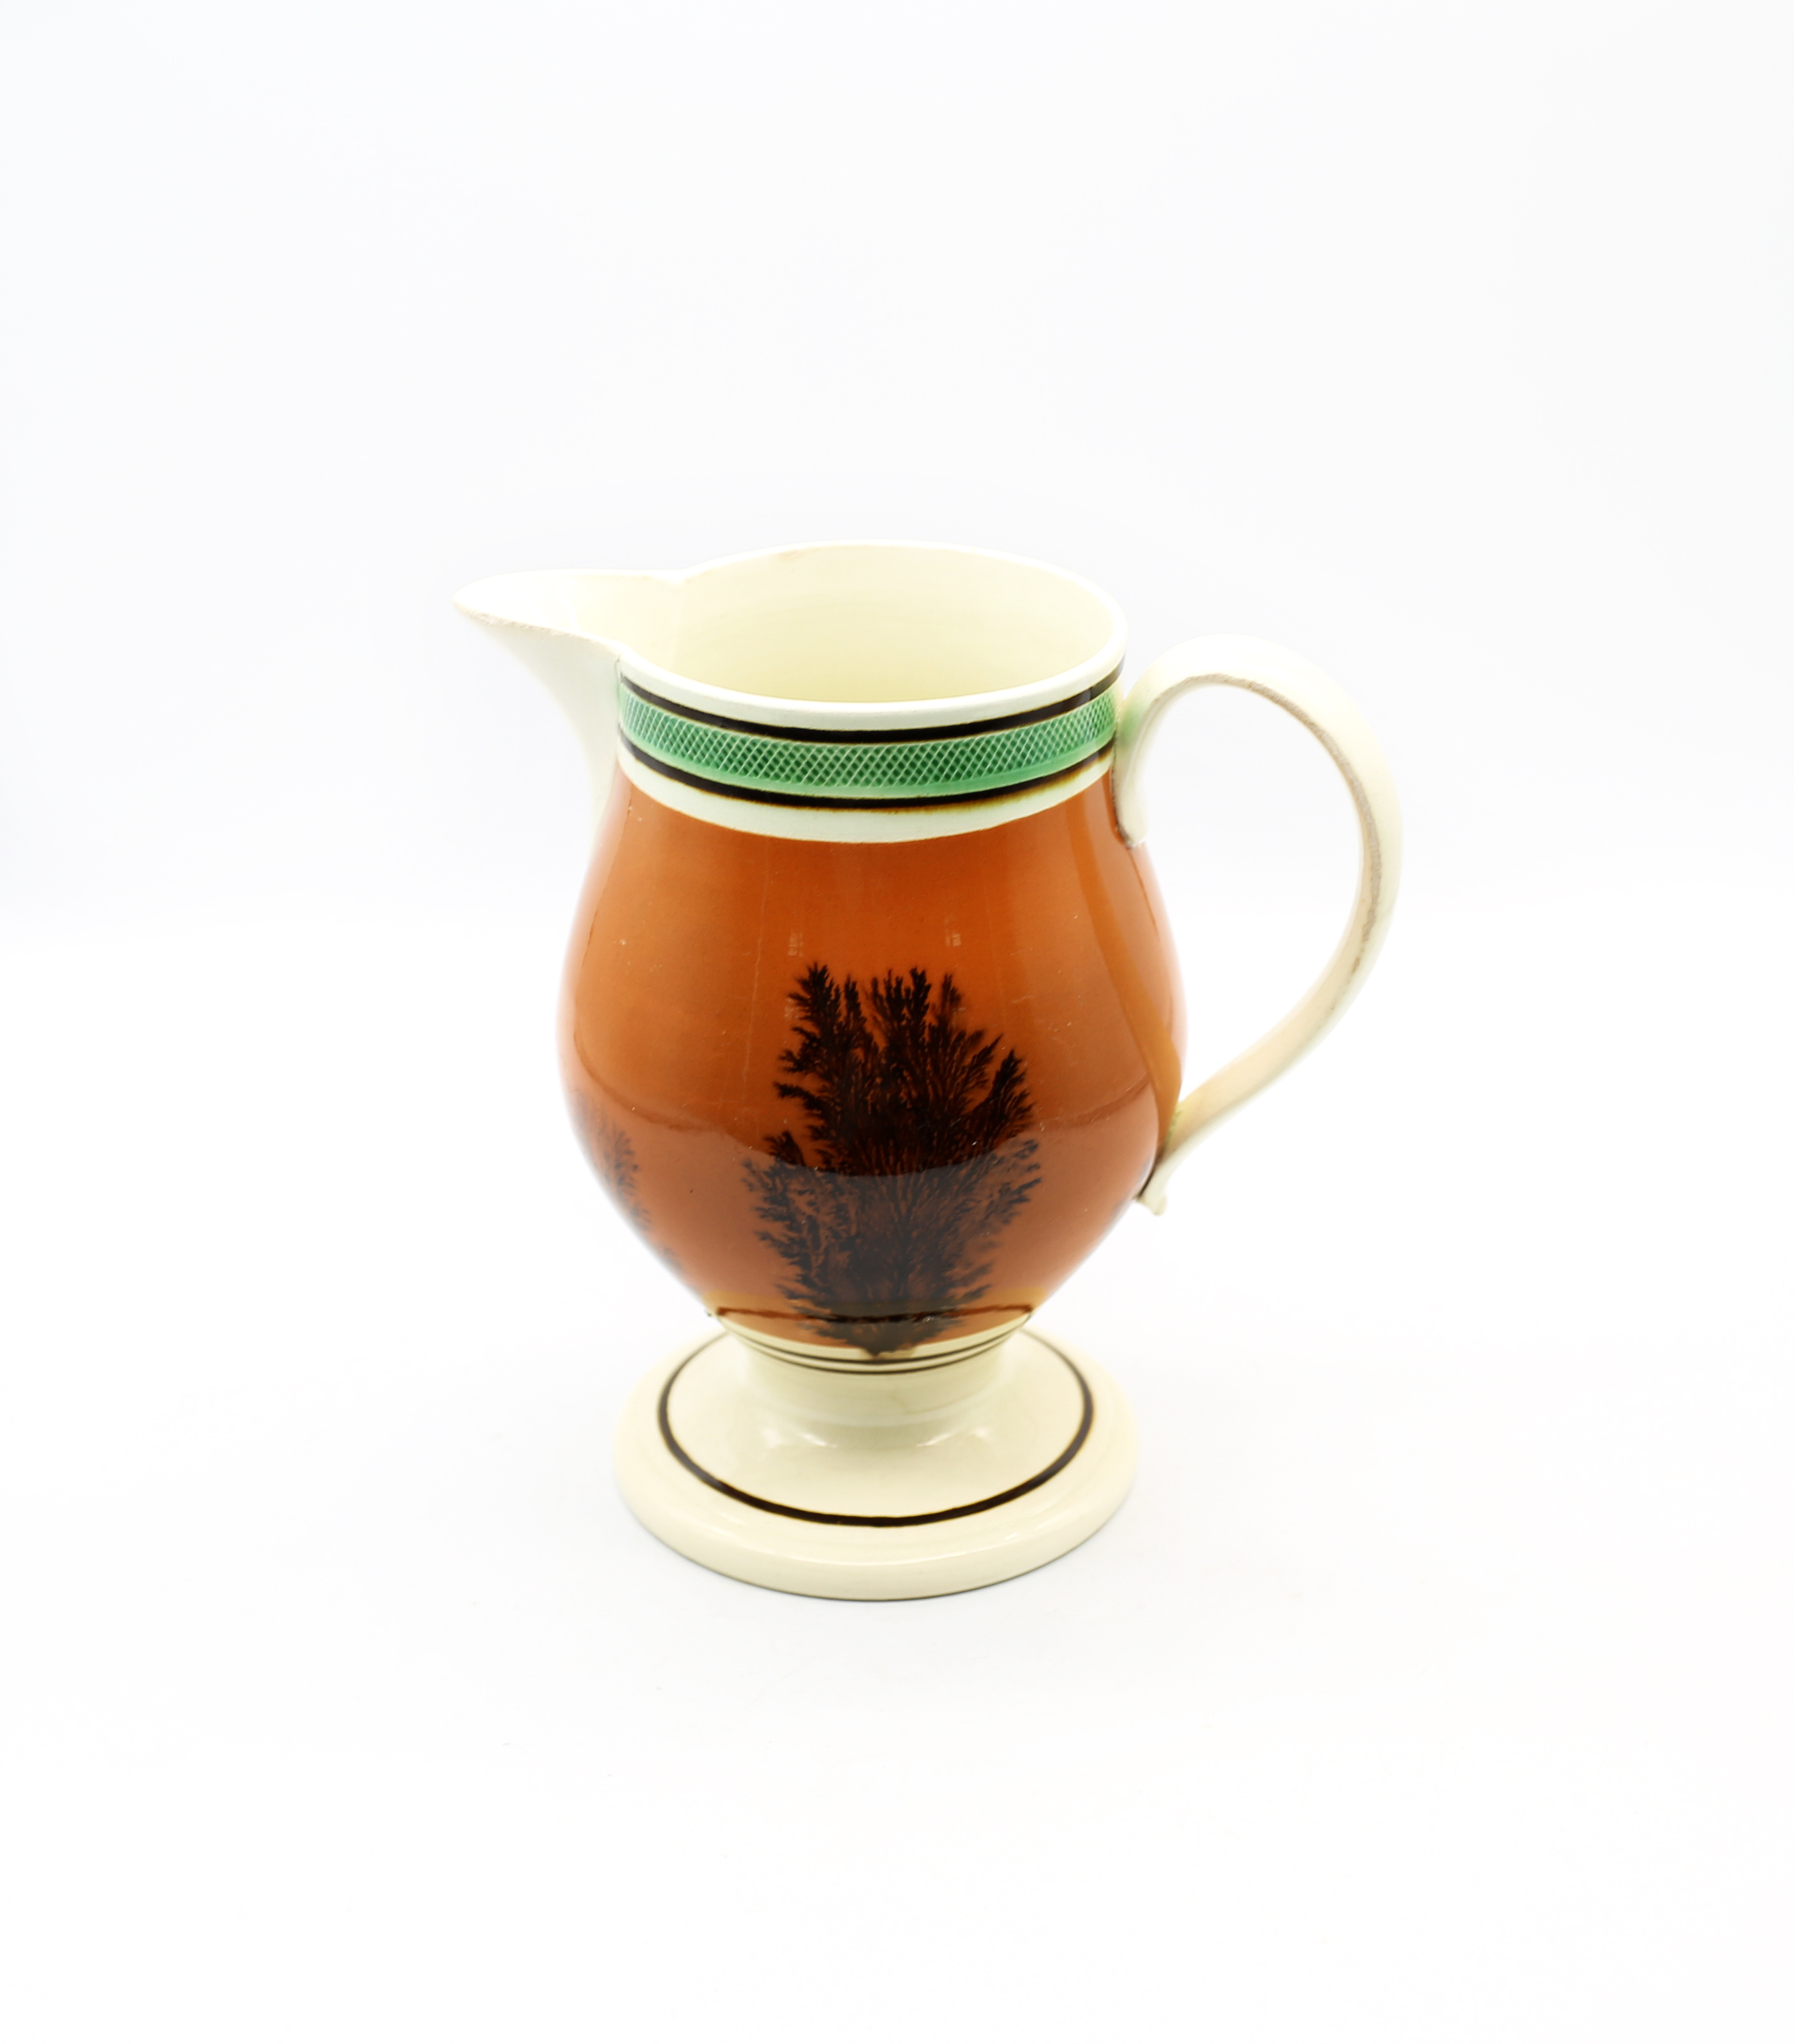 A creamware Mocha footed jug, dark terracotta with black feathered trees and green and brown